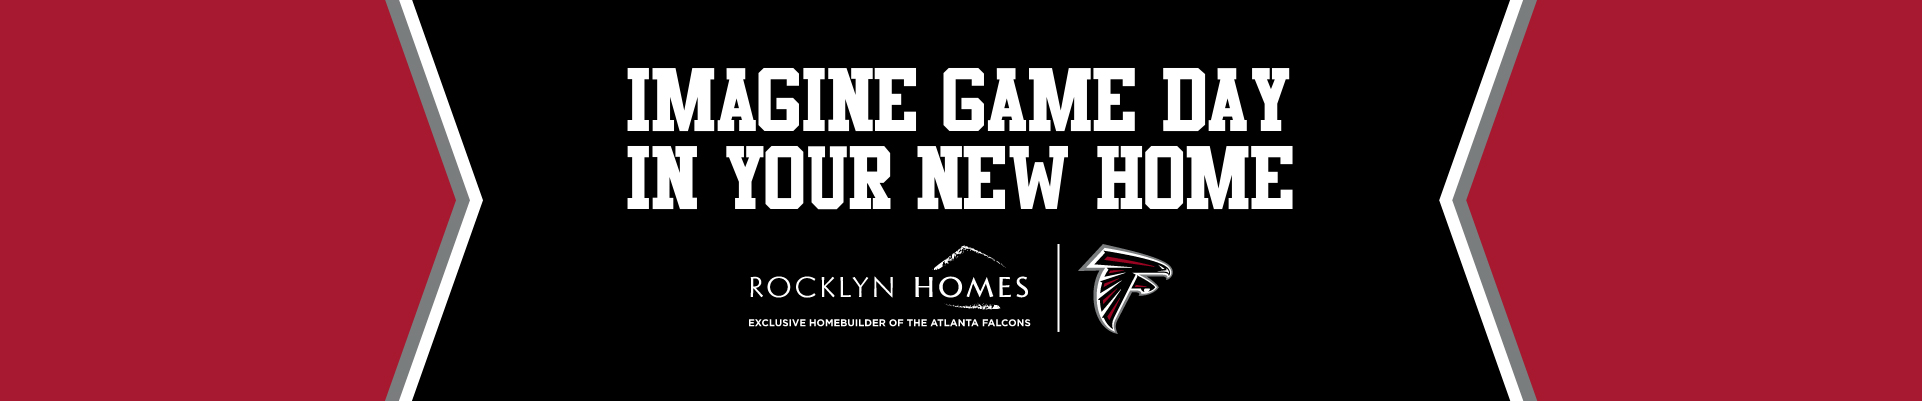 Falcons - Imagine game day in your new home